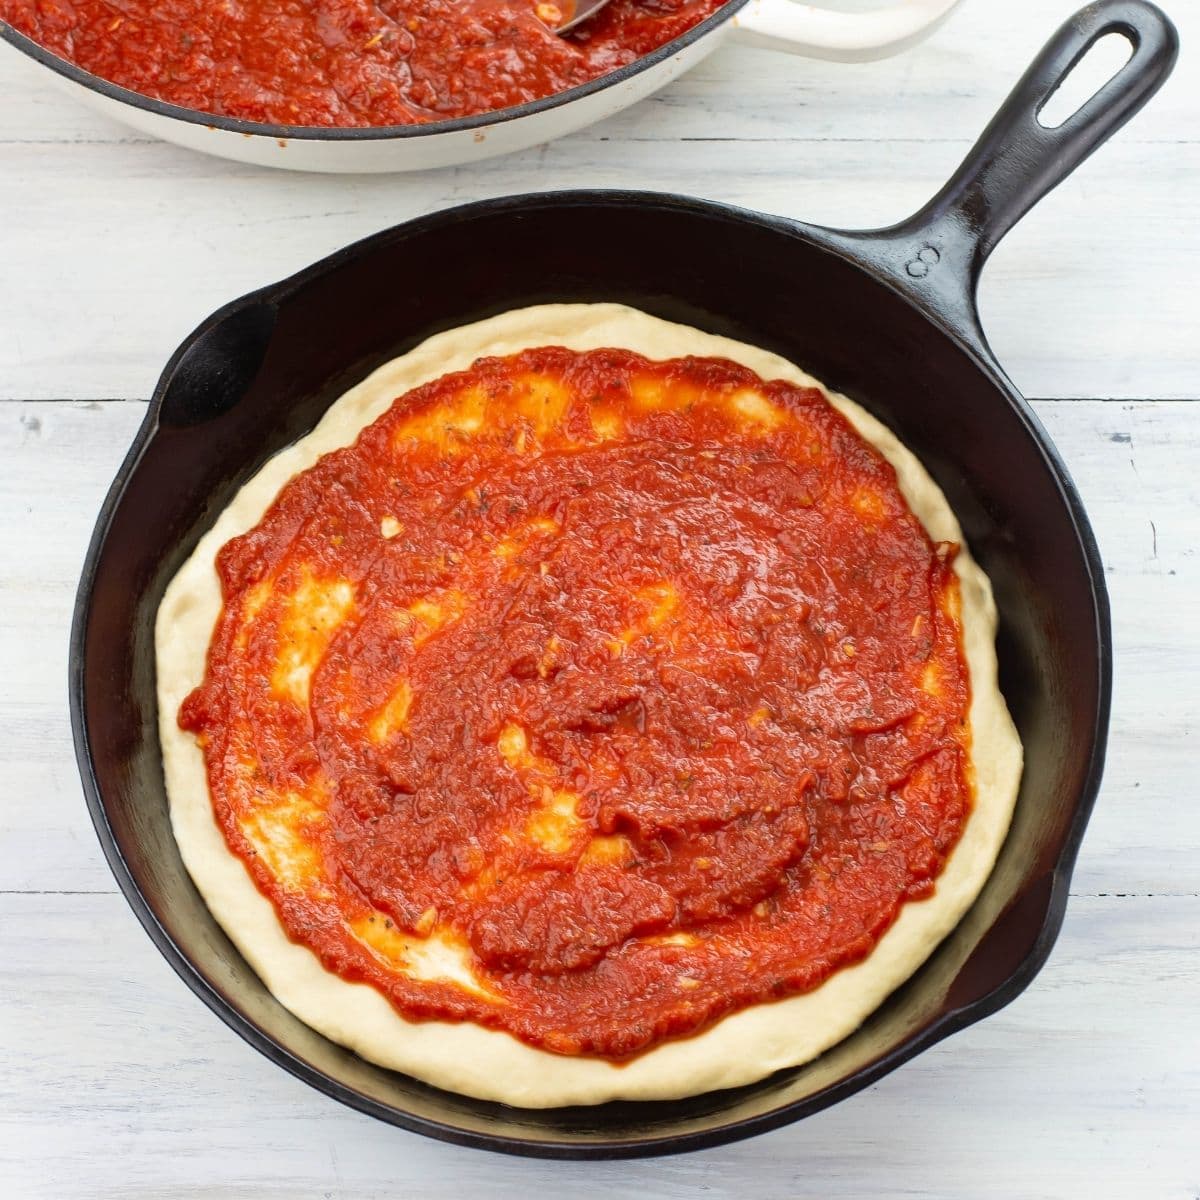 Cast iron skillet pizza dough spread with a thick homemade pizza sauce.